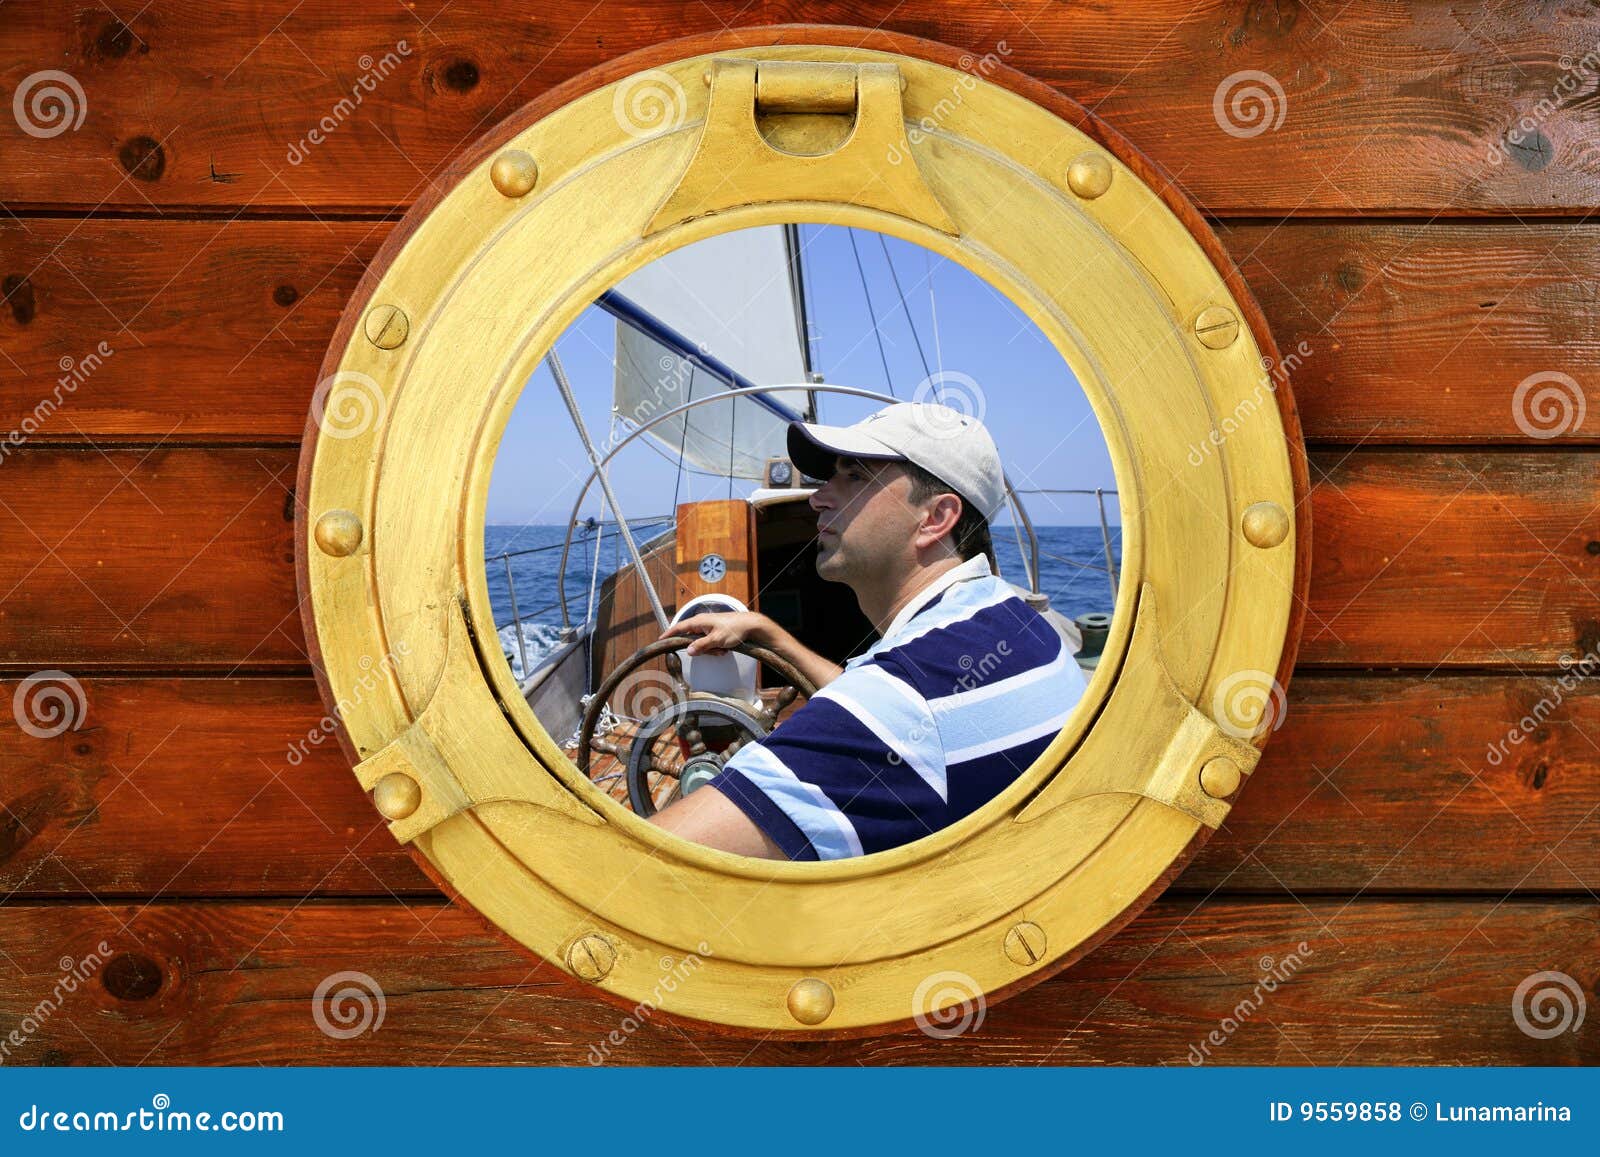 sailor on sailboat, from boat window